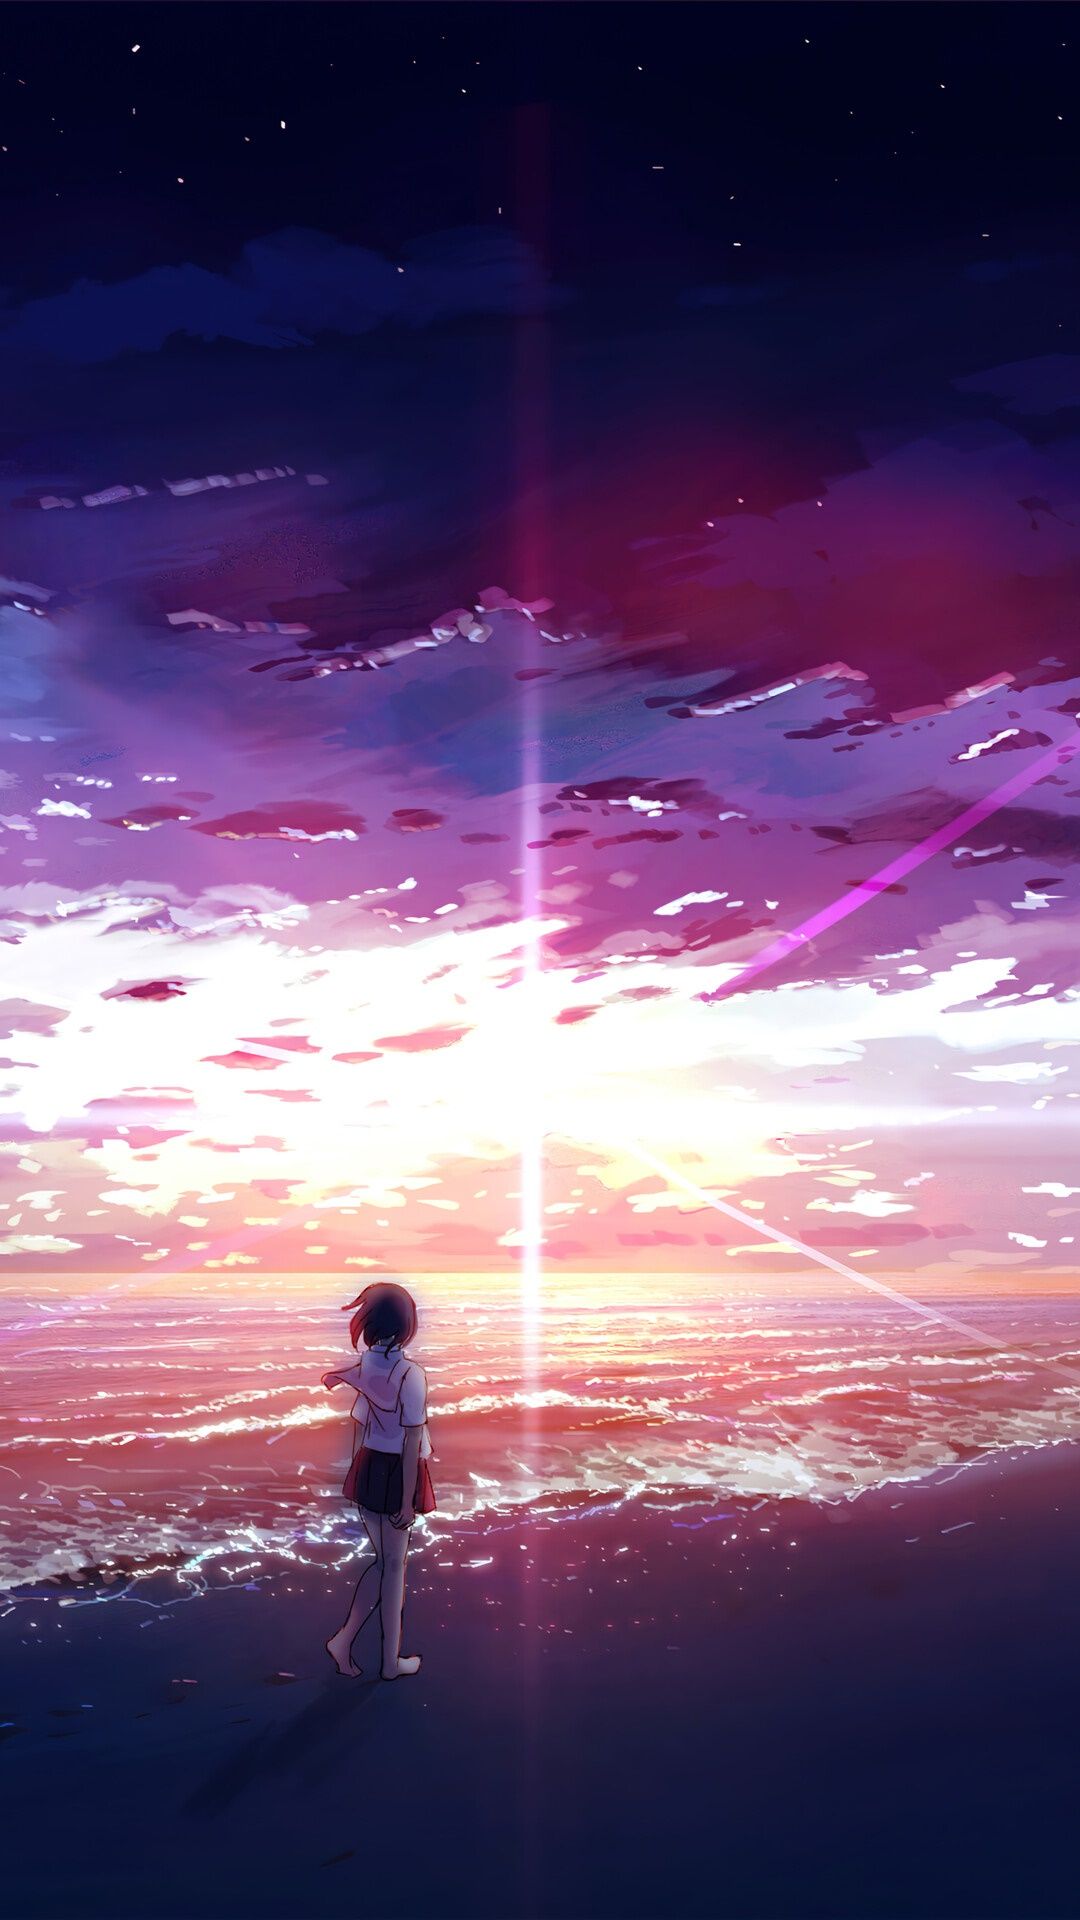 A person standing on the beach looking at an animated sunset - Anime landscape